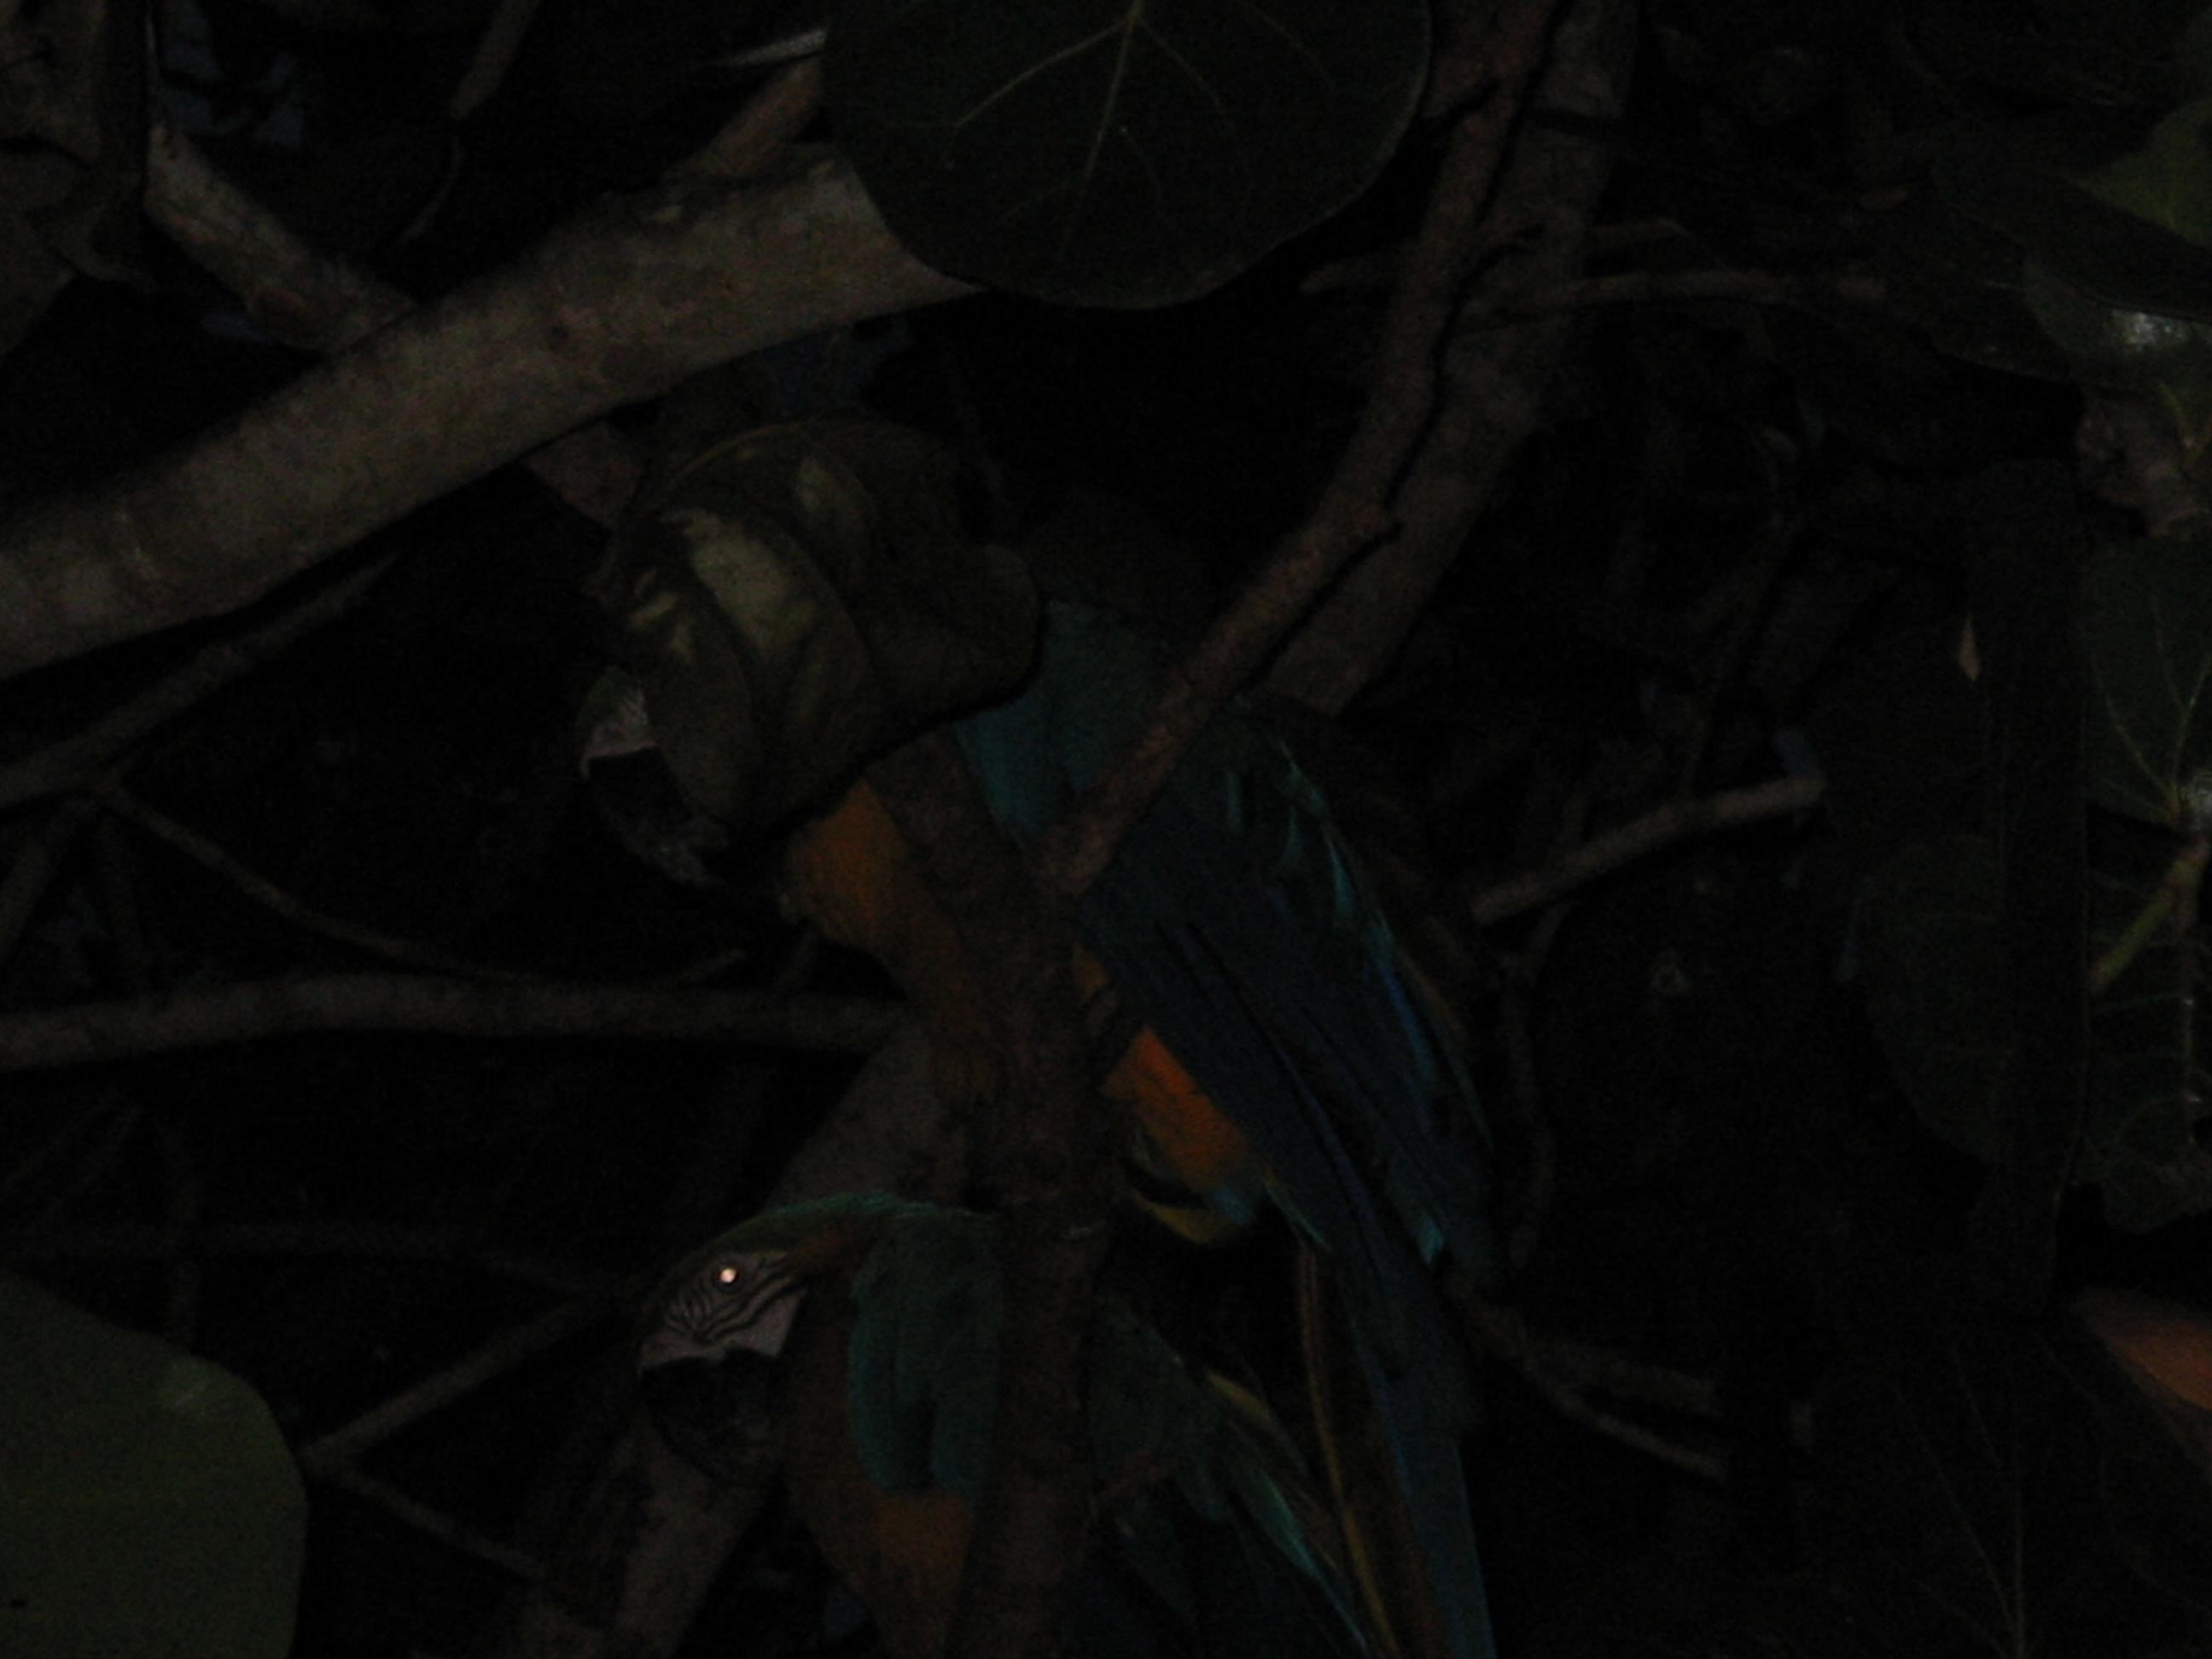 blue and yellow parrots at night